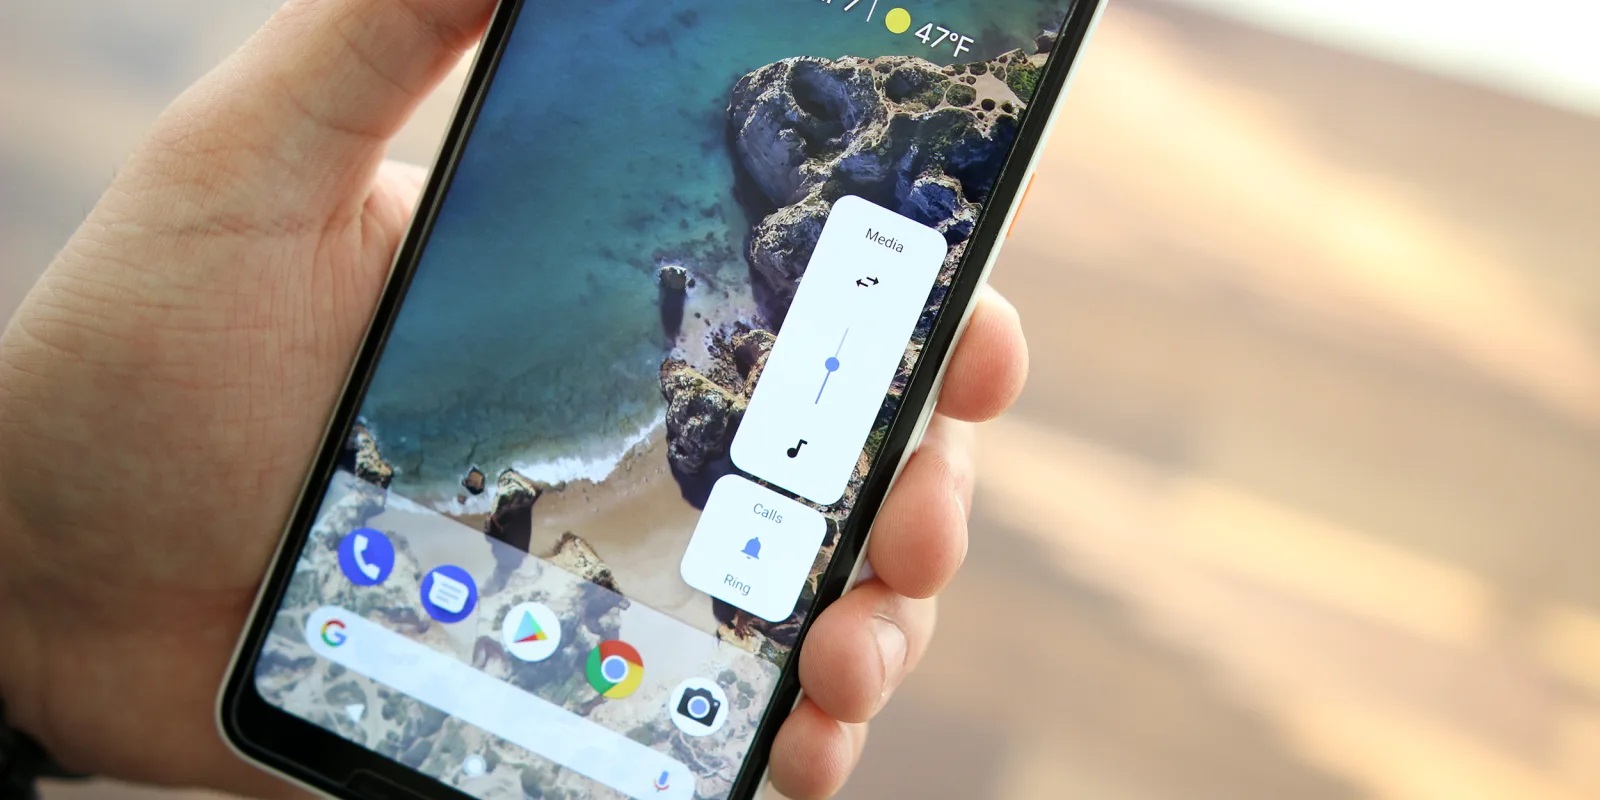 Google Pixel users will finally get separate ringtone and notifications volume sliders